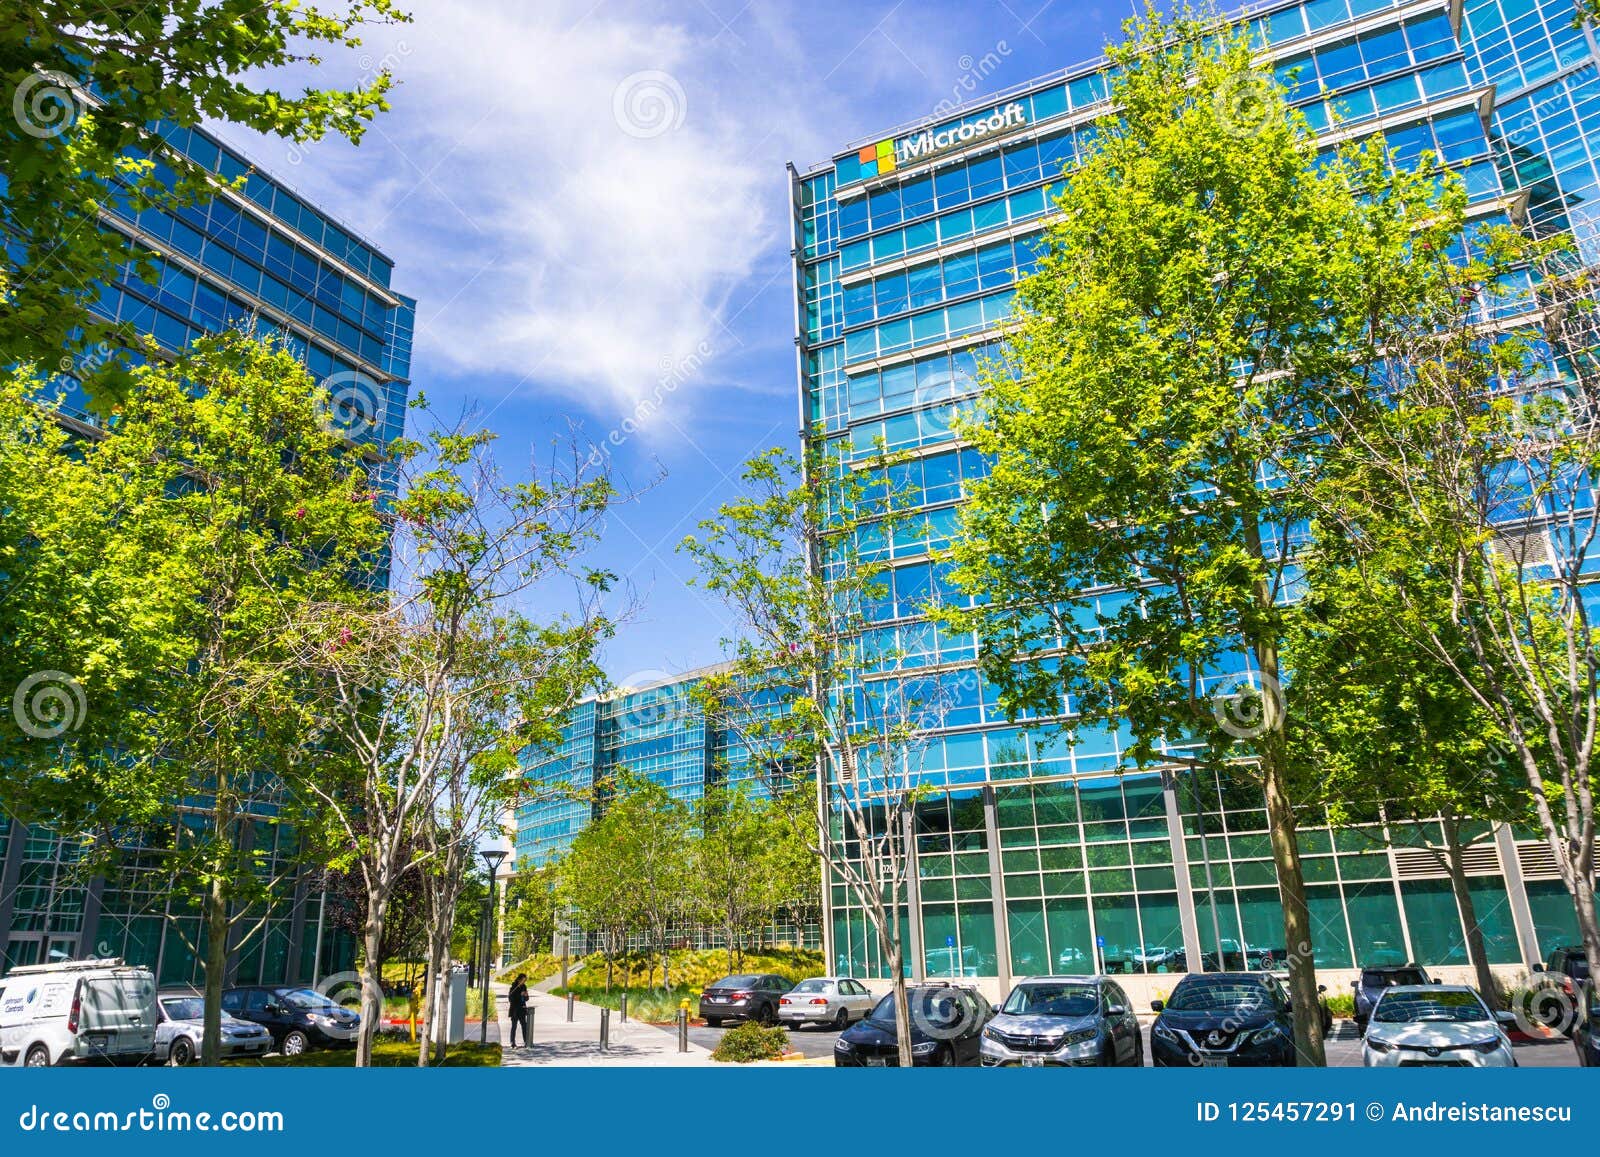 Microsoft Office Building, Silicon Valley Editorial Photo - Image of  architecture, buildings: 125457291